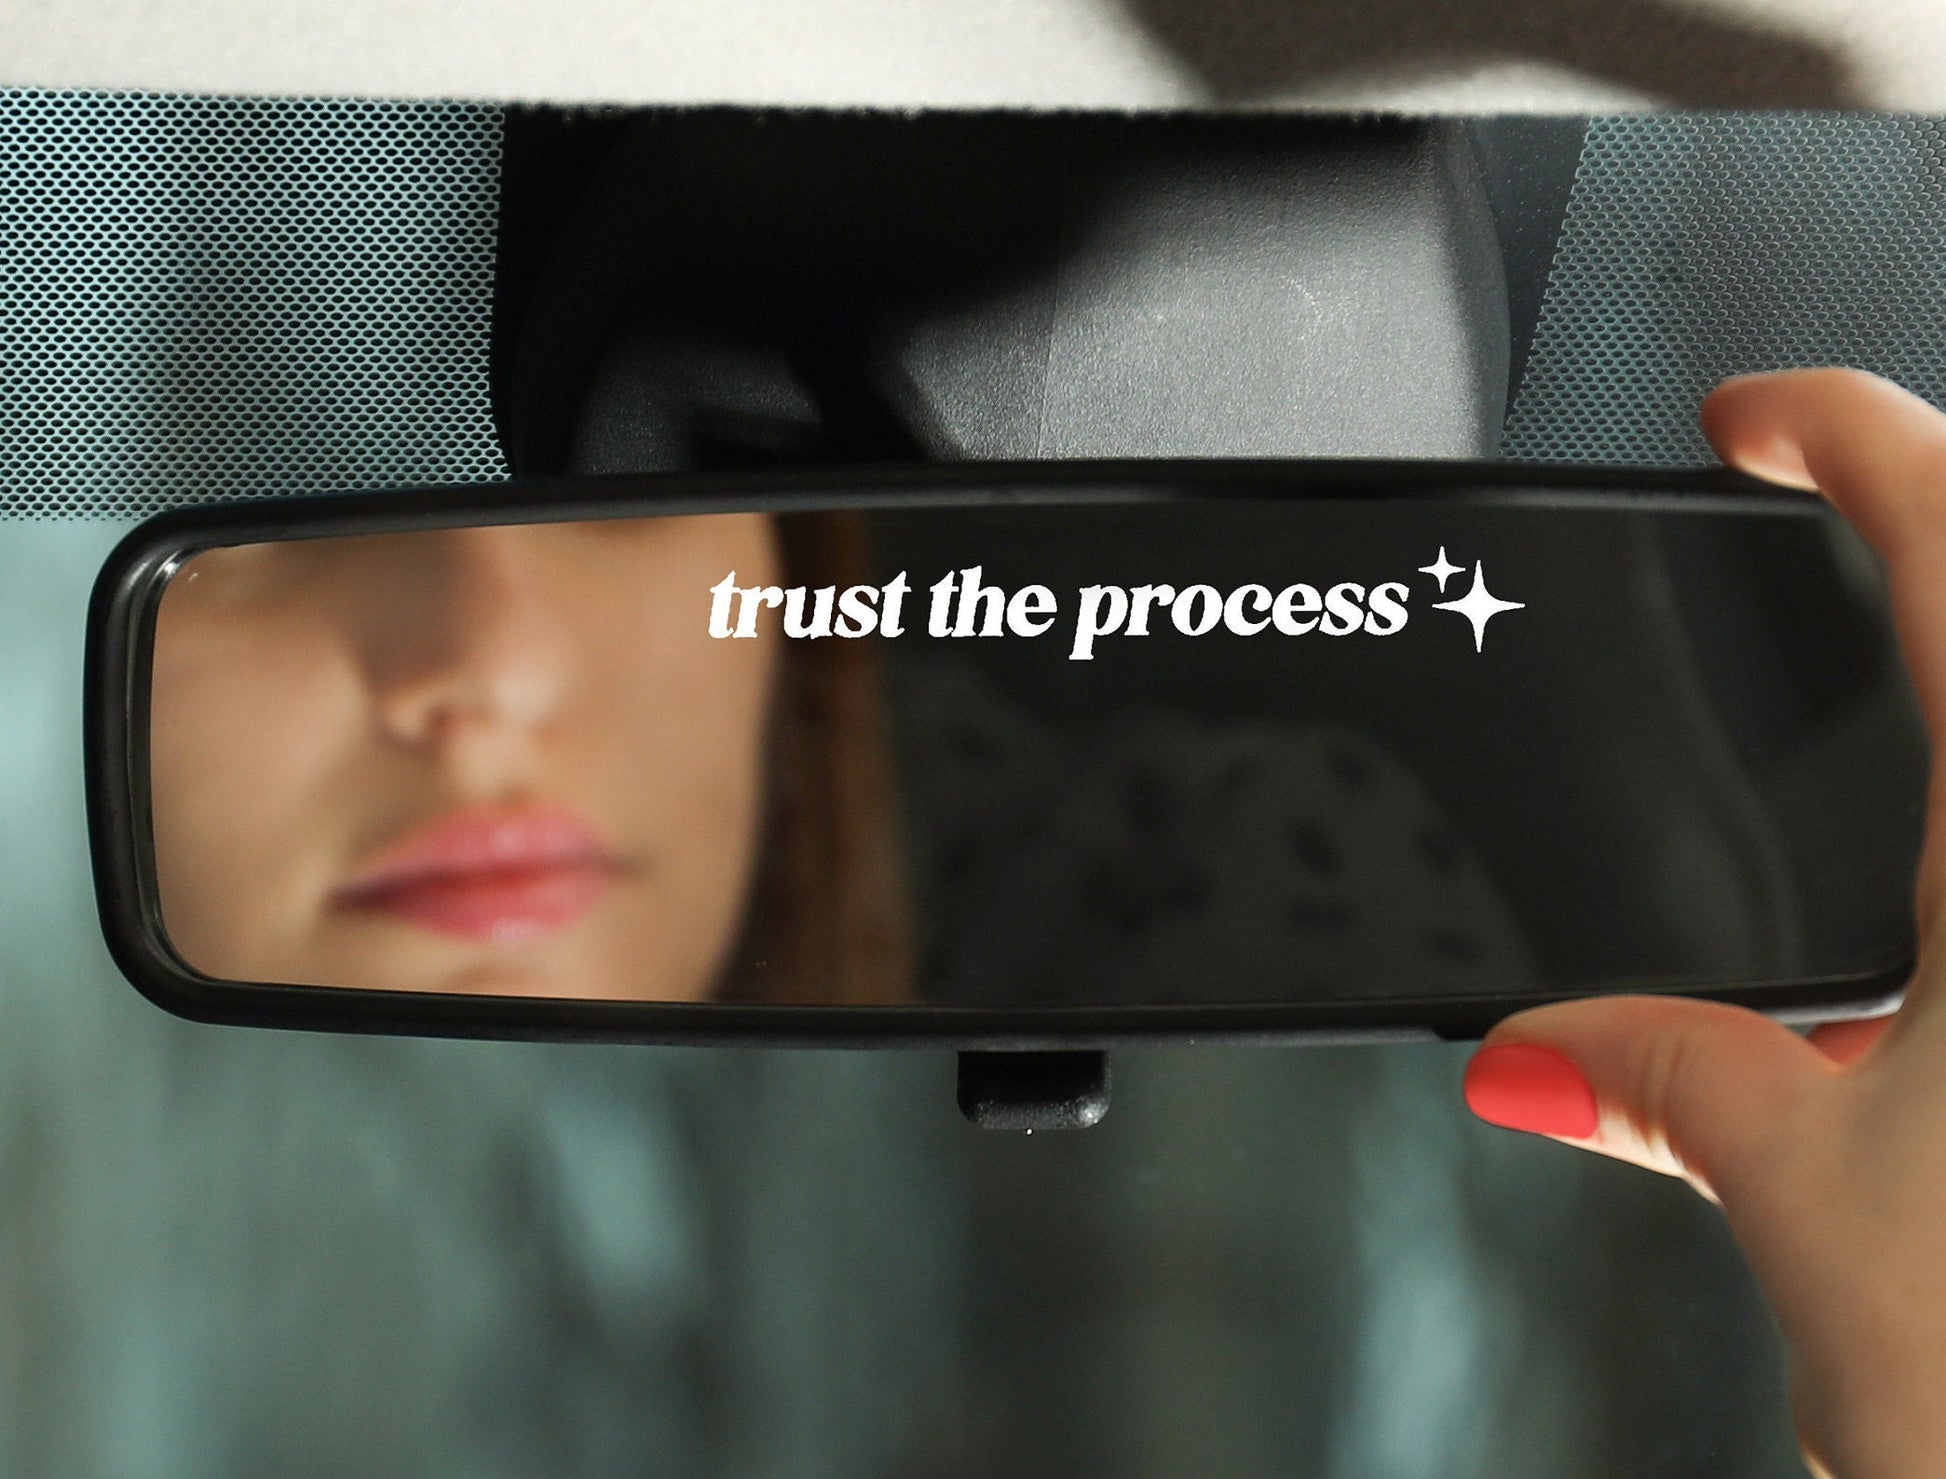 NEW! Trust the Process Mirror Sticker. Positive Affirmations for Mental Health. Car Accessories Gifts.